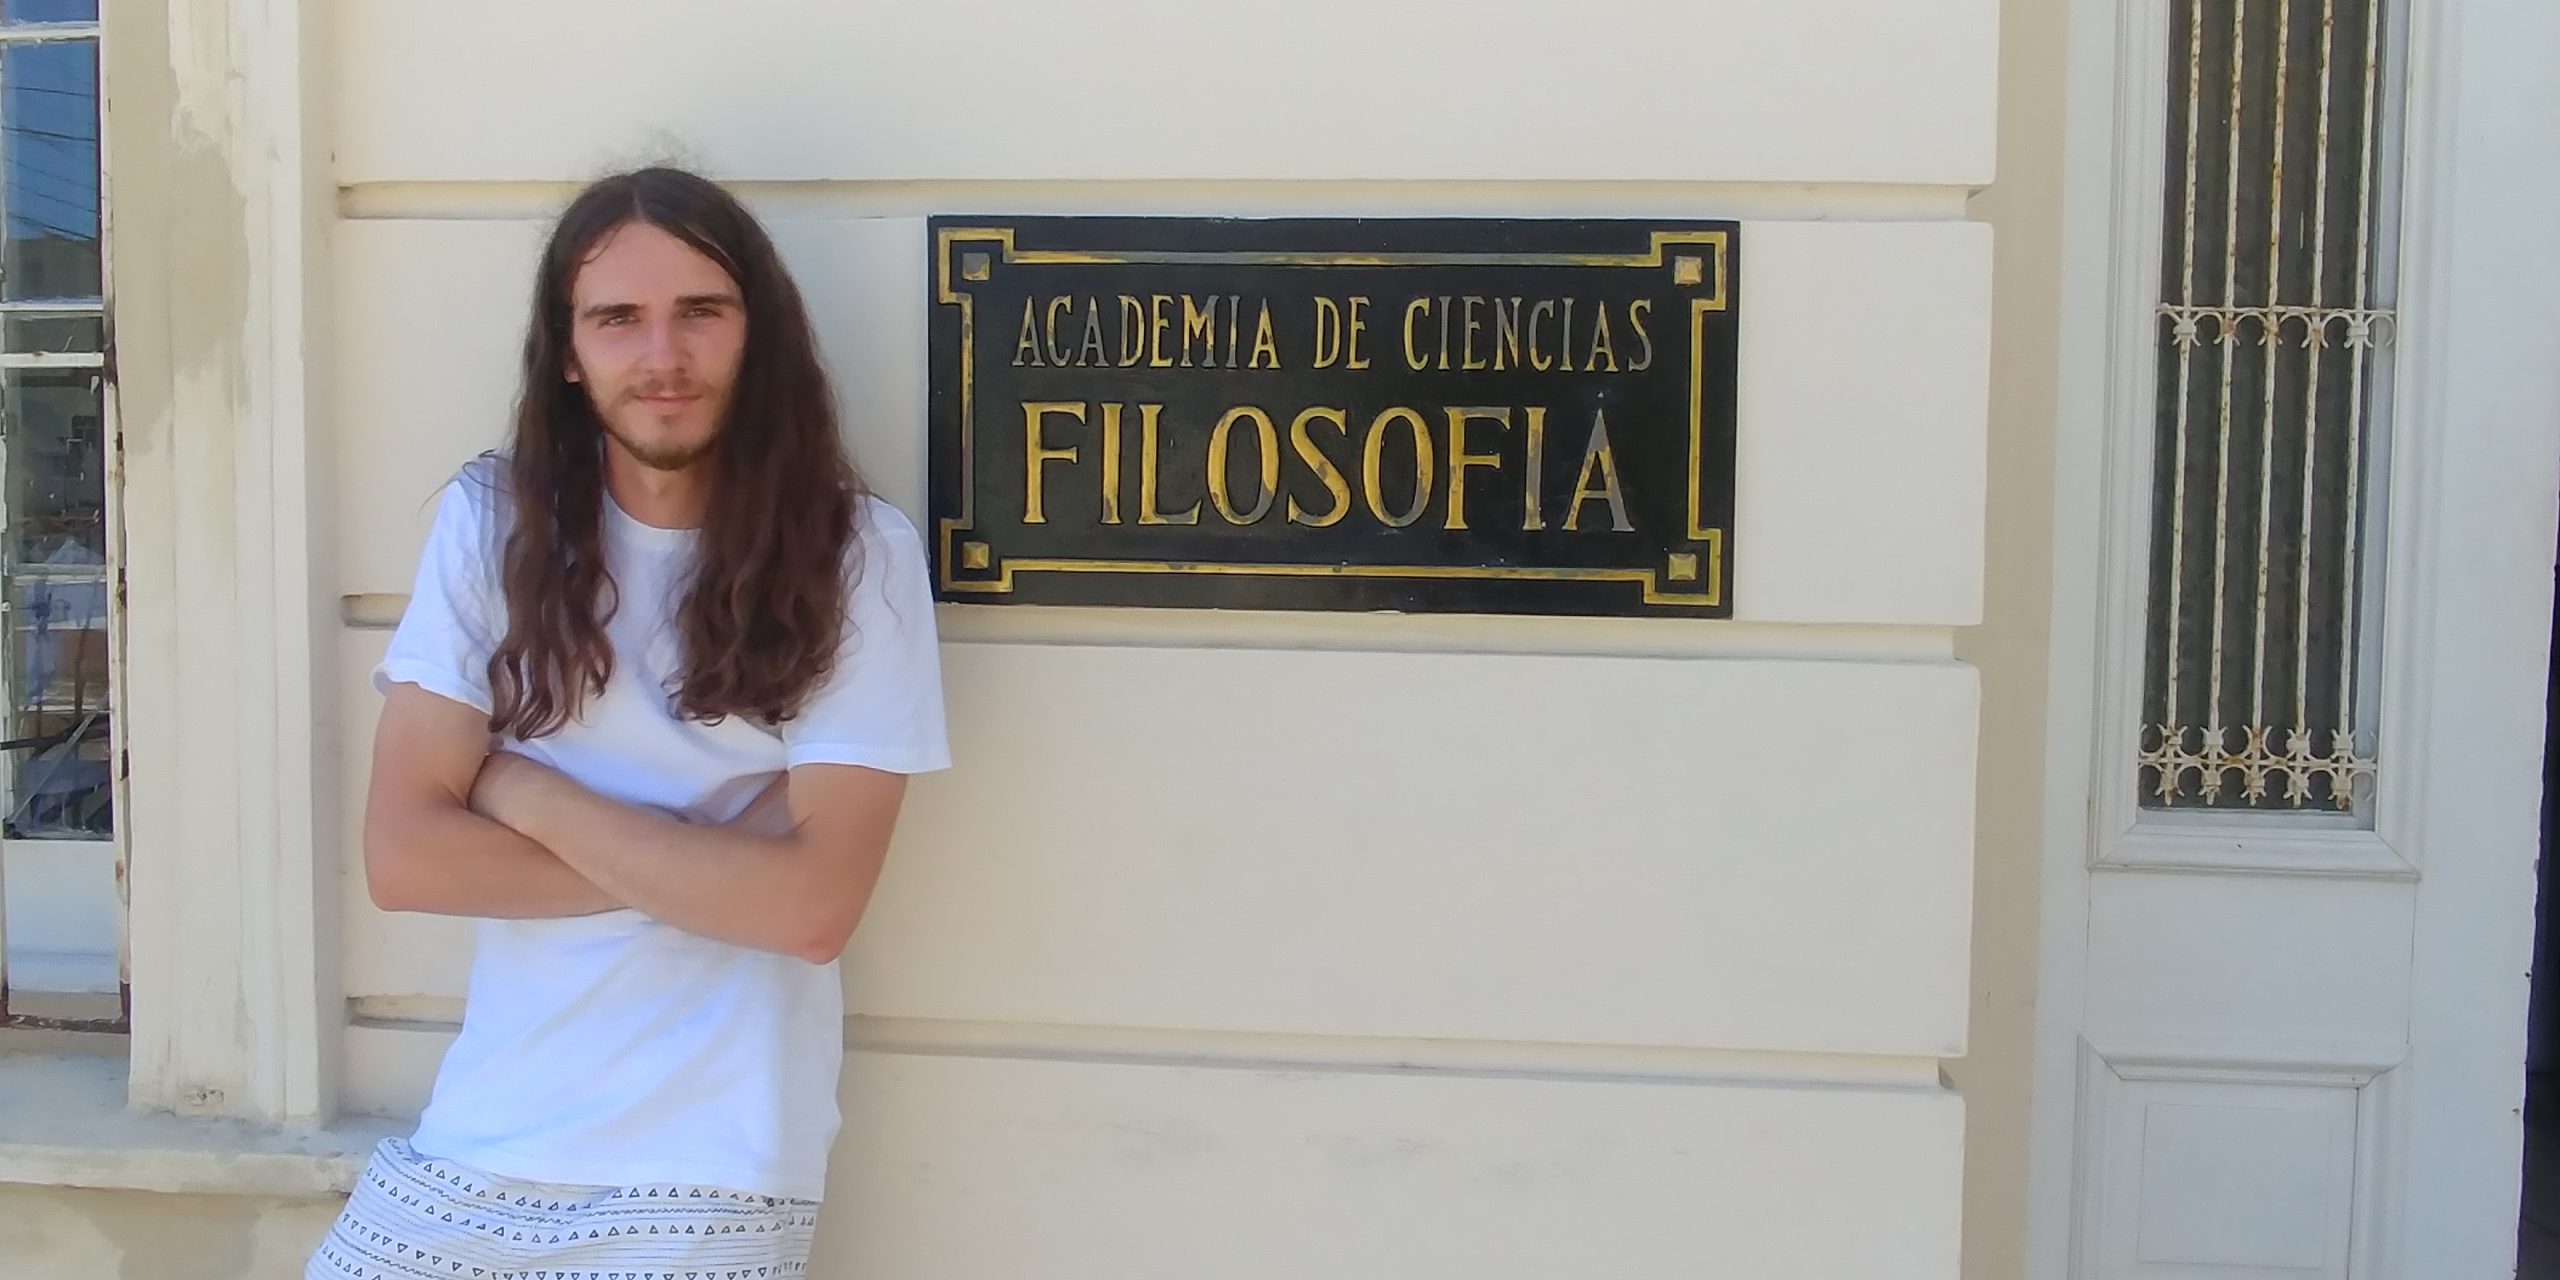 Ryan Bourgoin studied abroad in Cuba during June and July 2019.